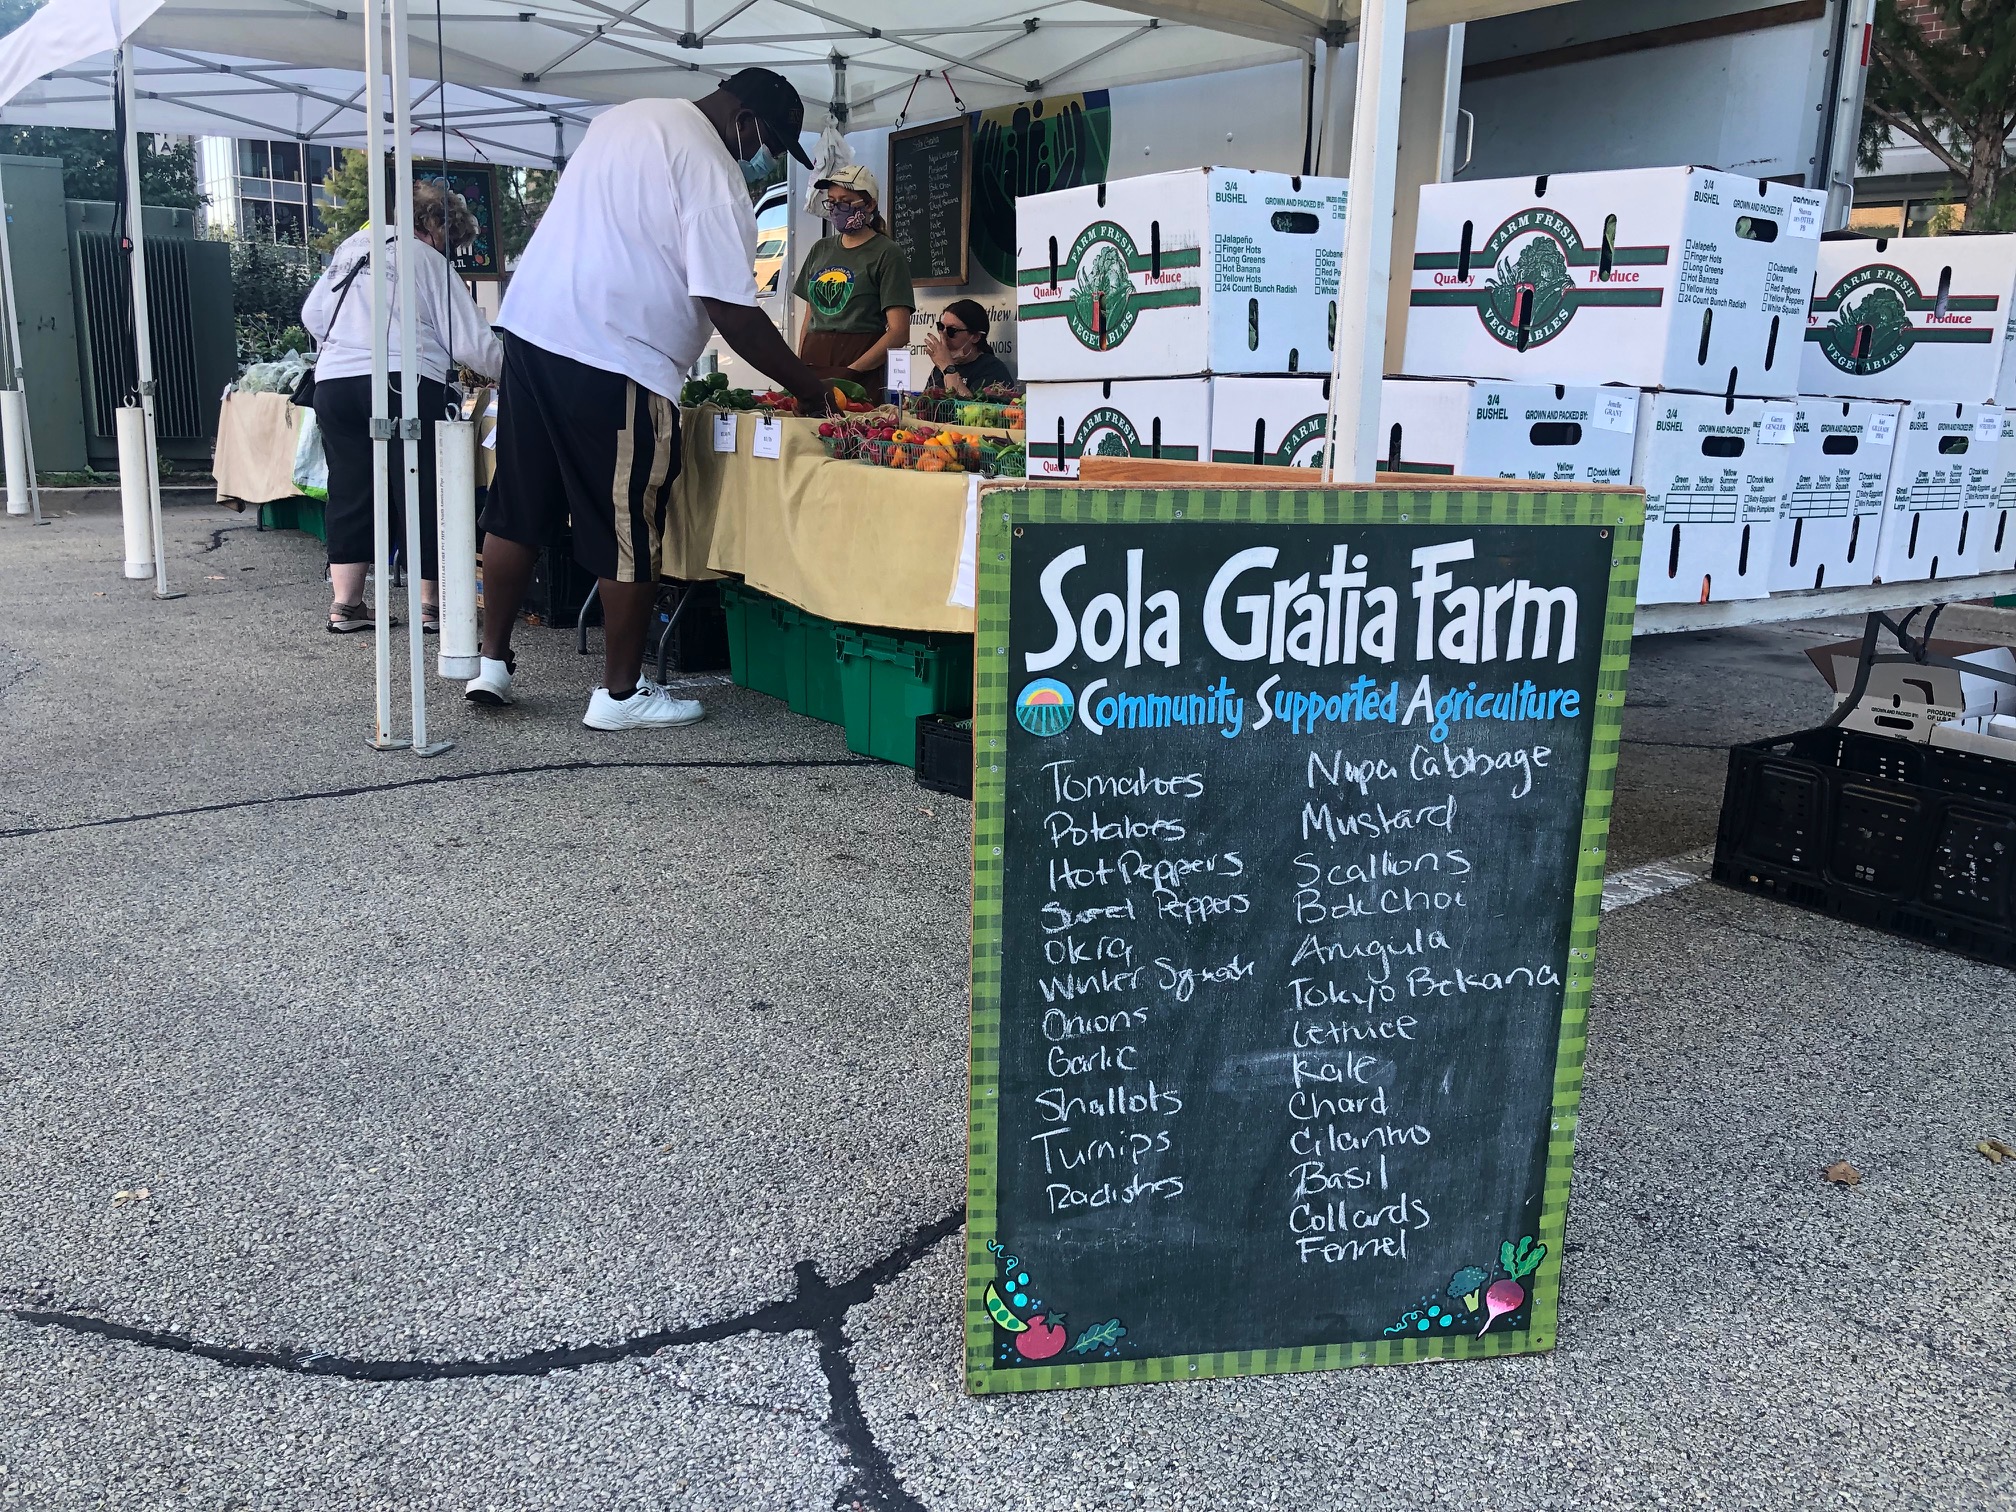 In front of the Sola Gratia farm stand at the Champaign market, there are two shoppers picking out produce. Photo by Alyssa Buckley.